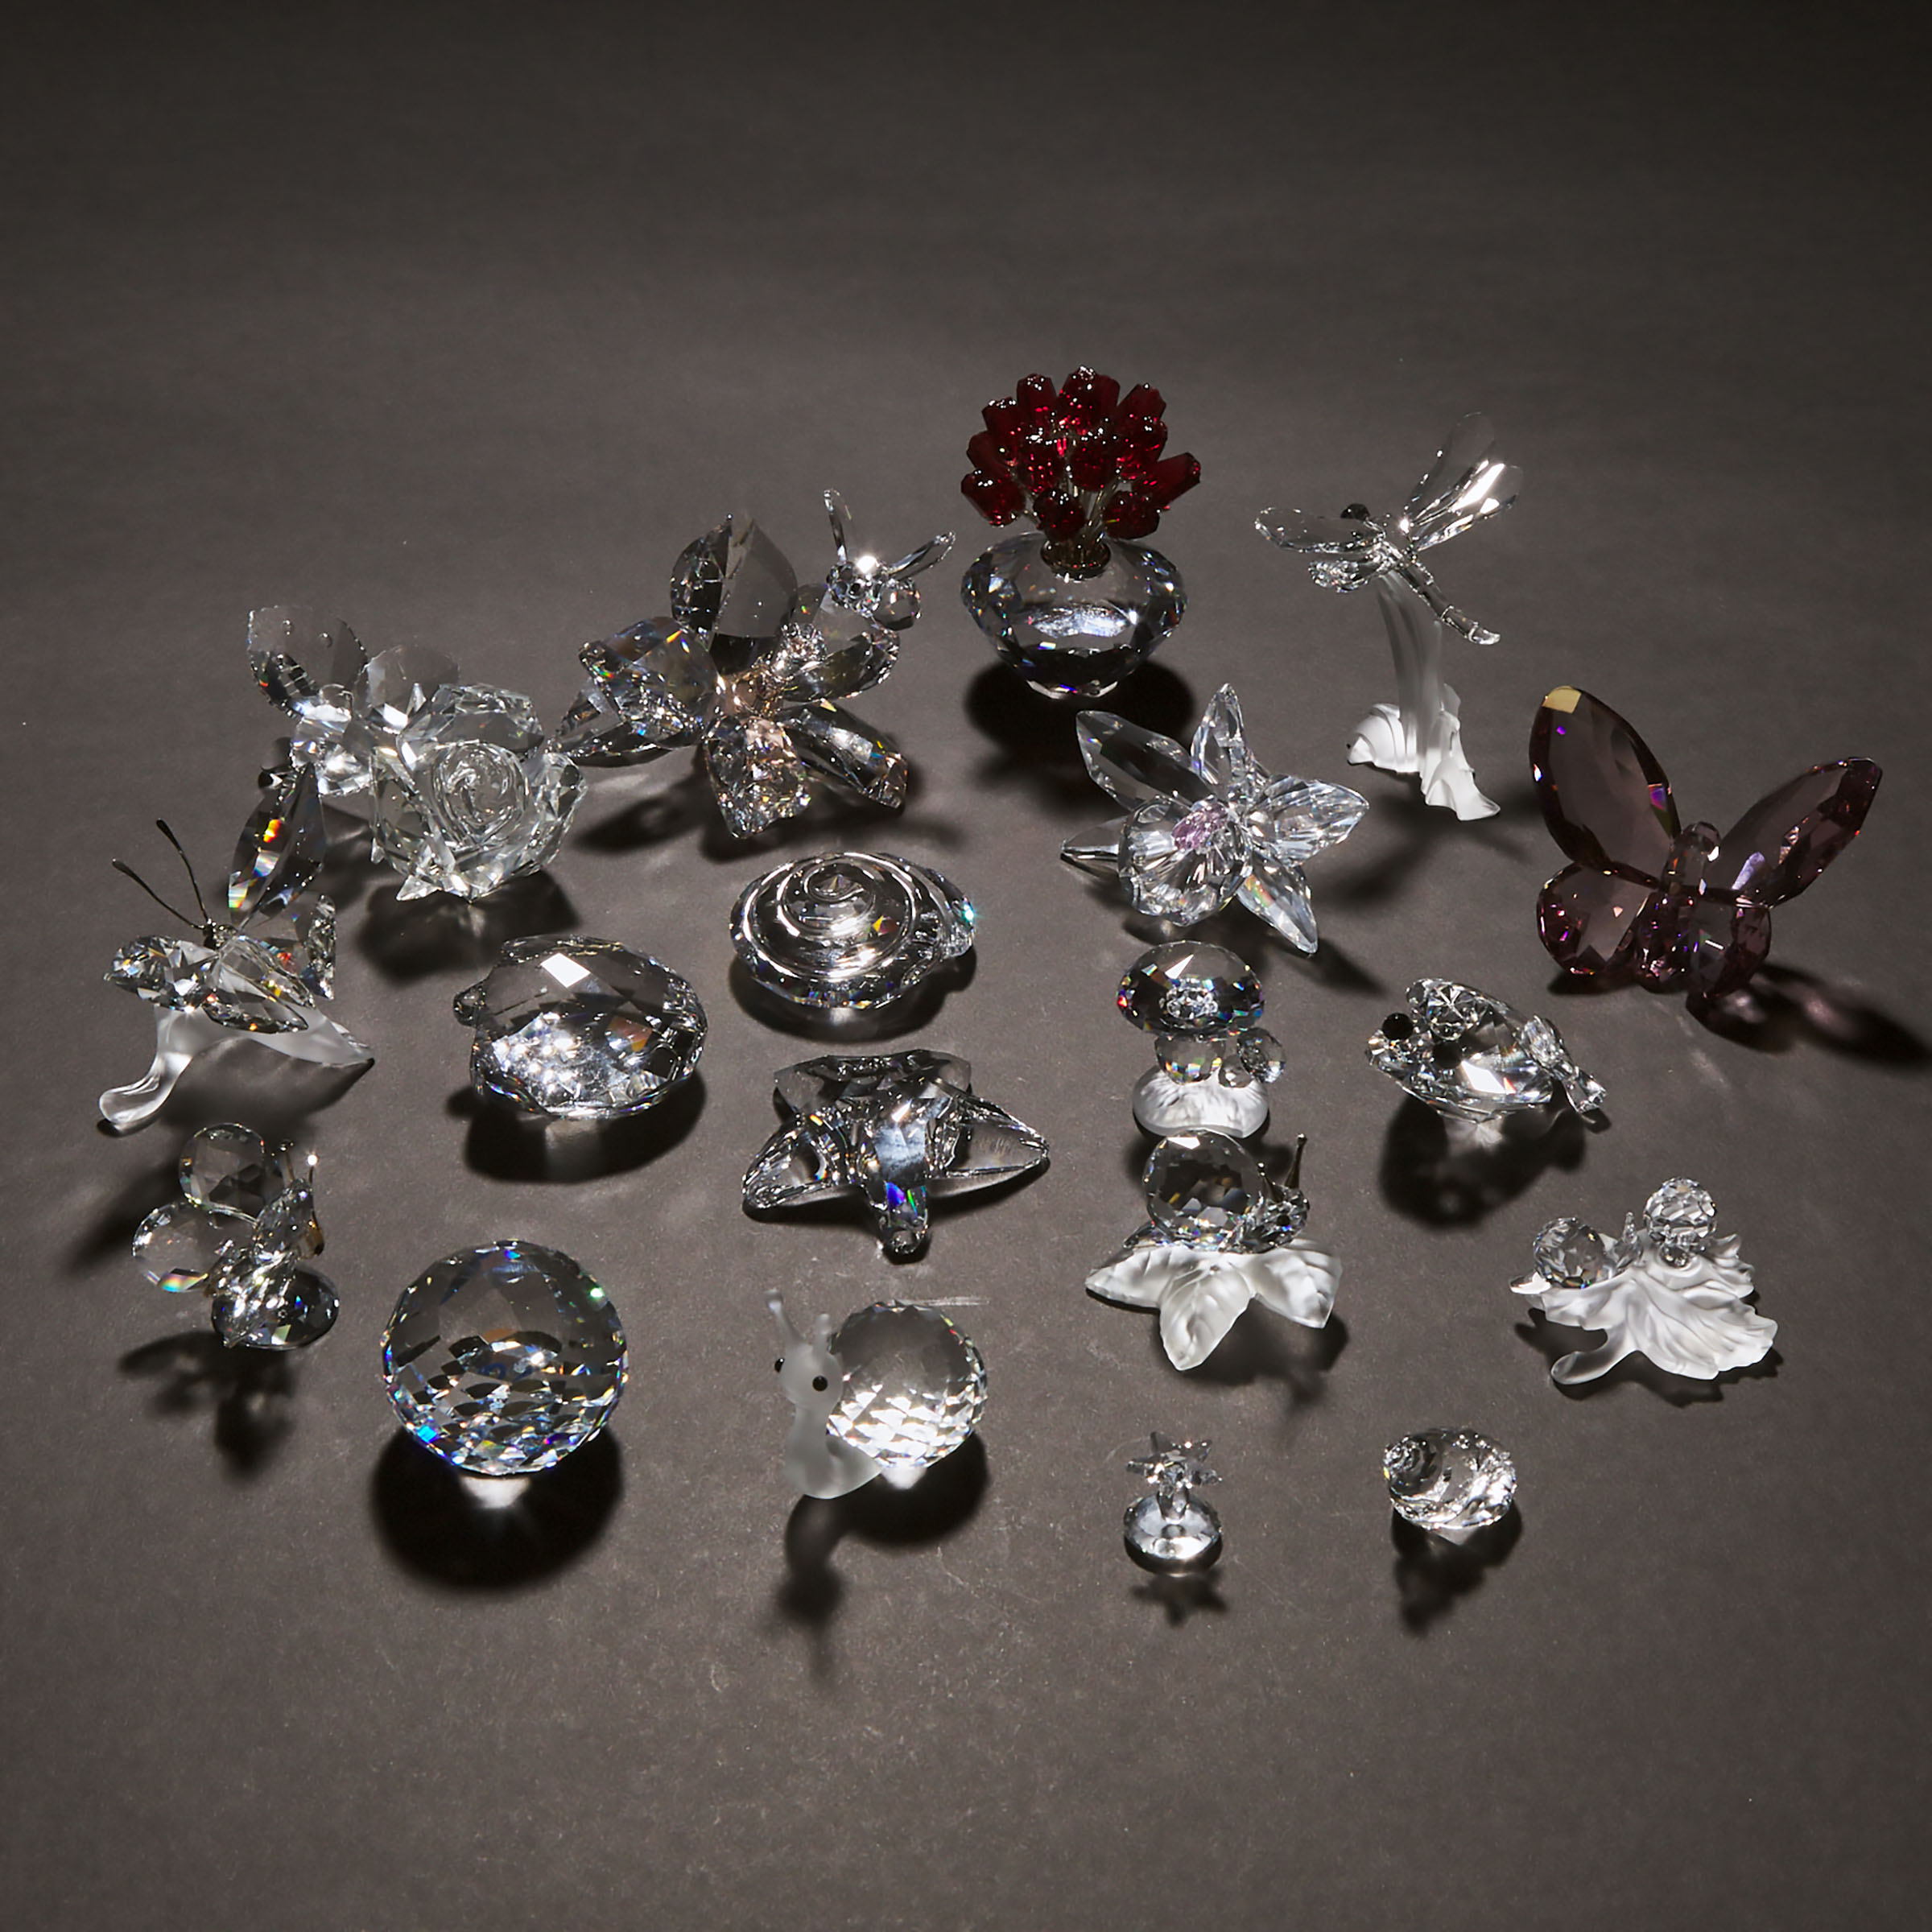 Group of Nineteen Swarovski Crystal Flowers, Shells, Insects, and Other Decorative Objects, late 20th/early 21st century